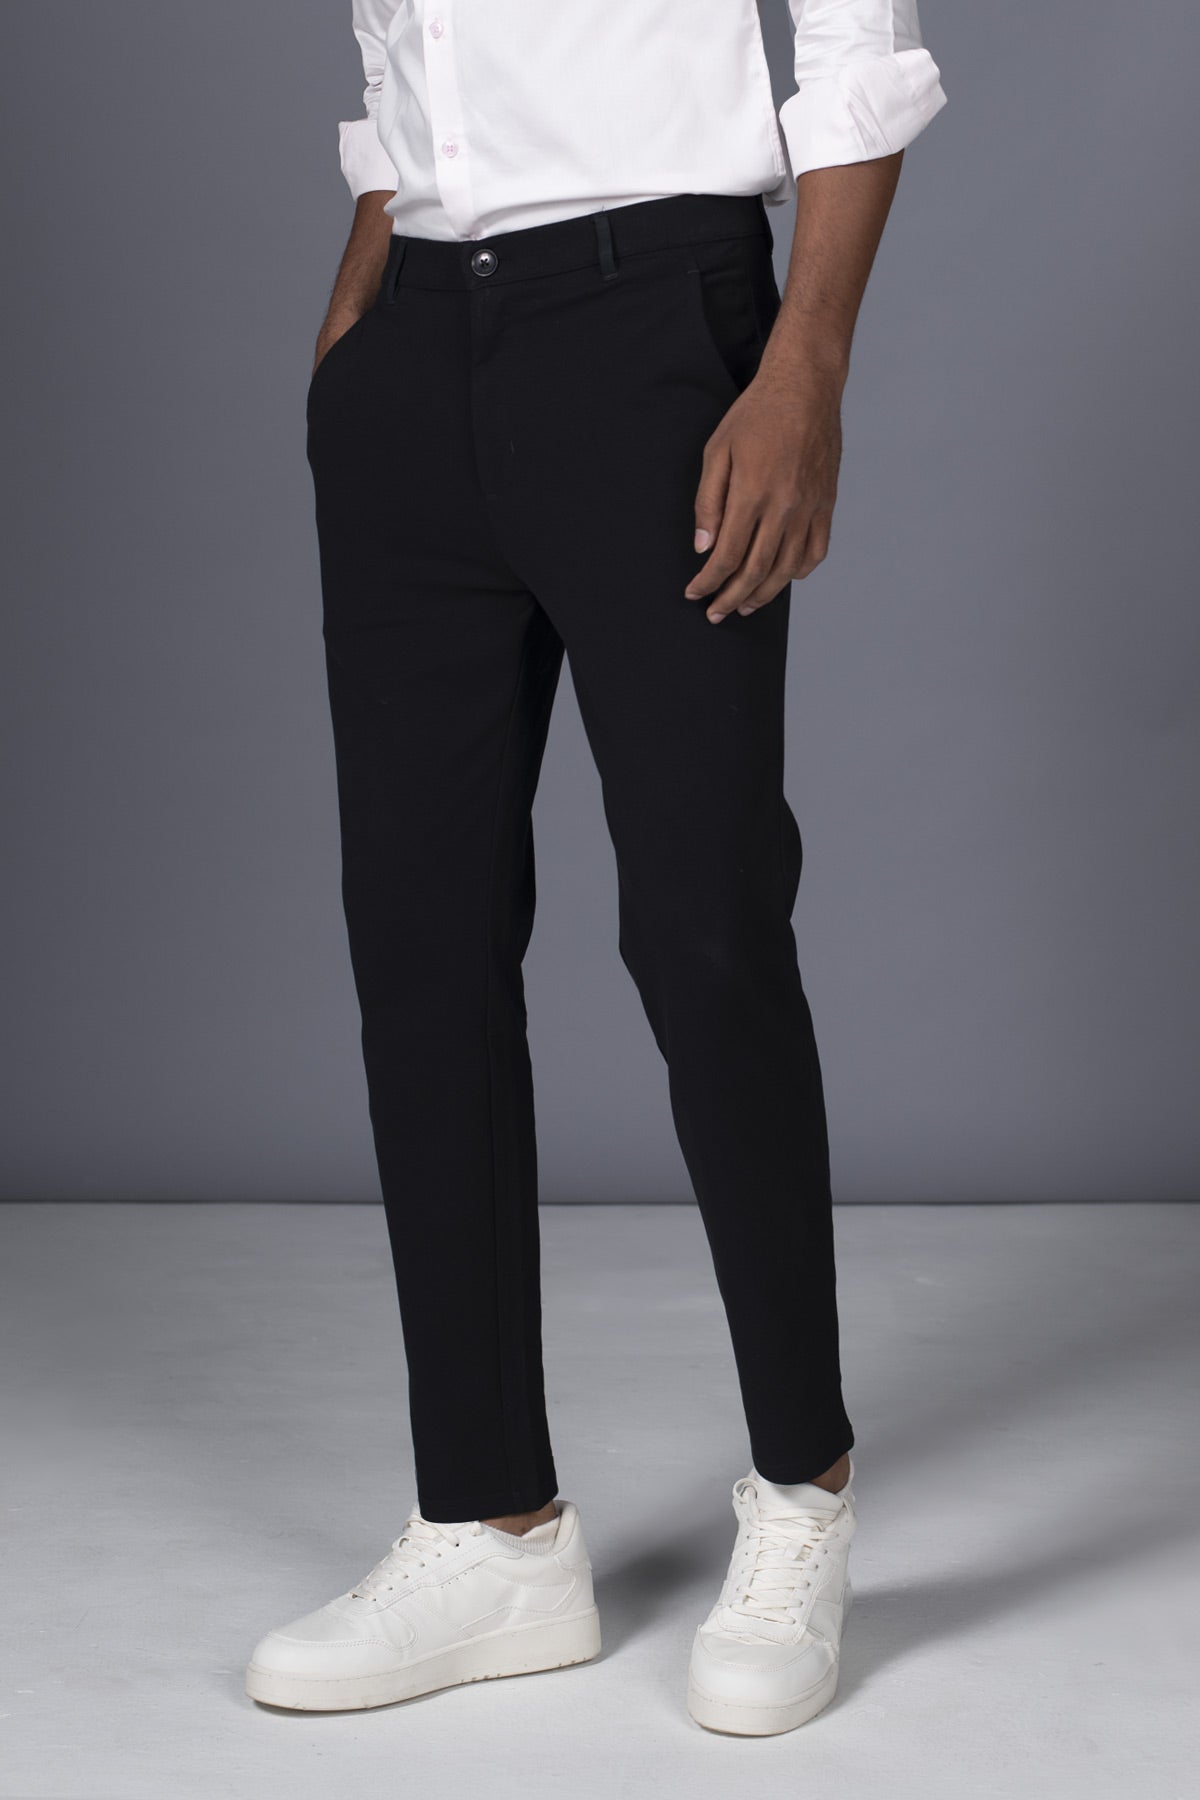 Men's Black Relaxed Fit Stretch Dress Pant, 47% OFF